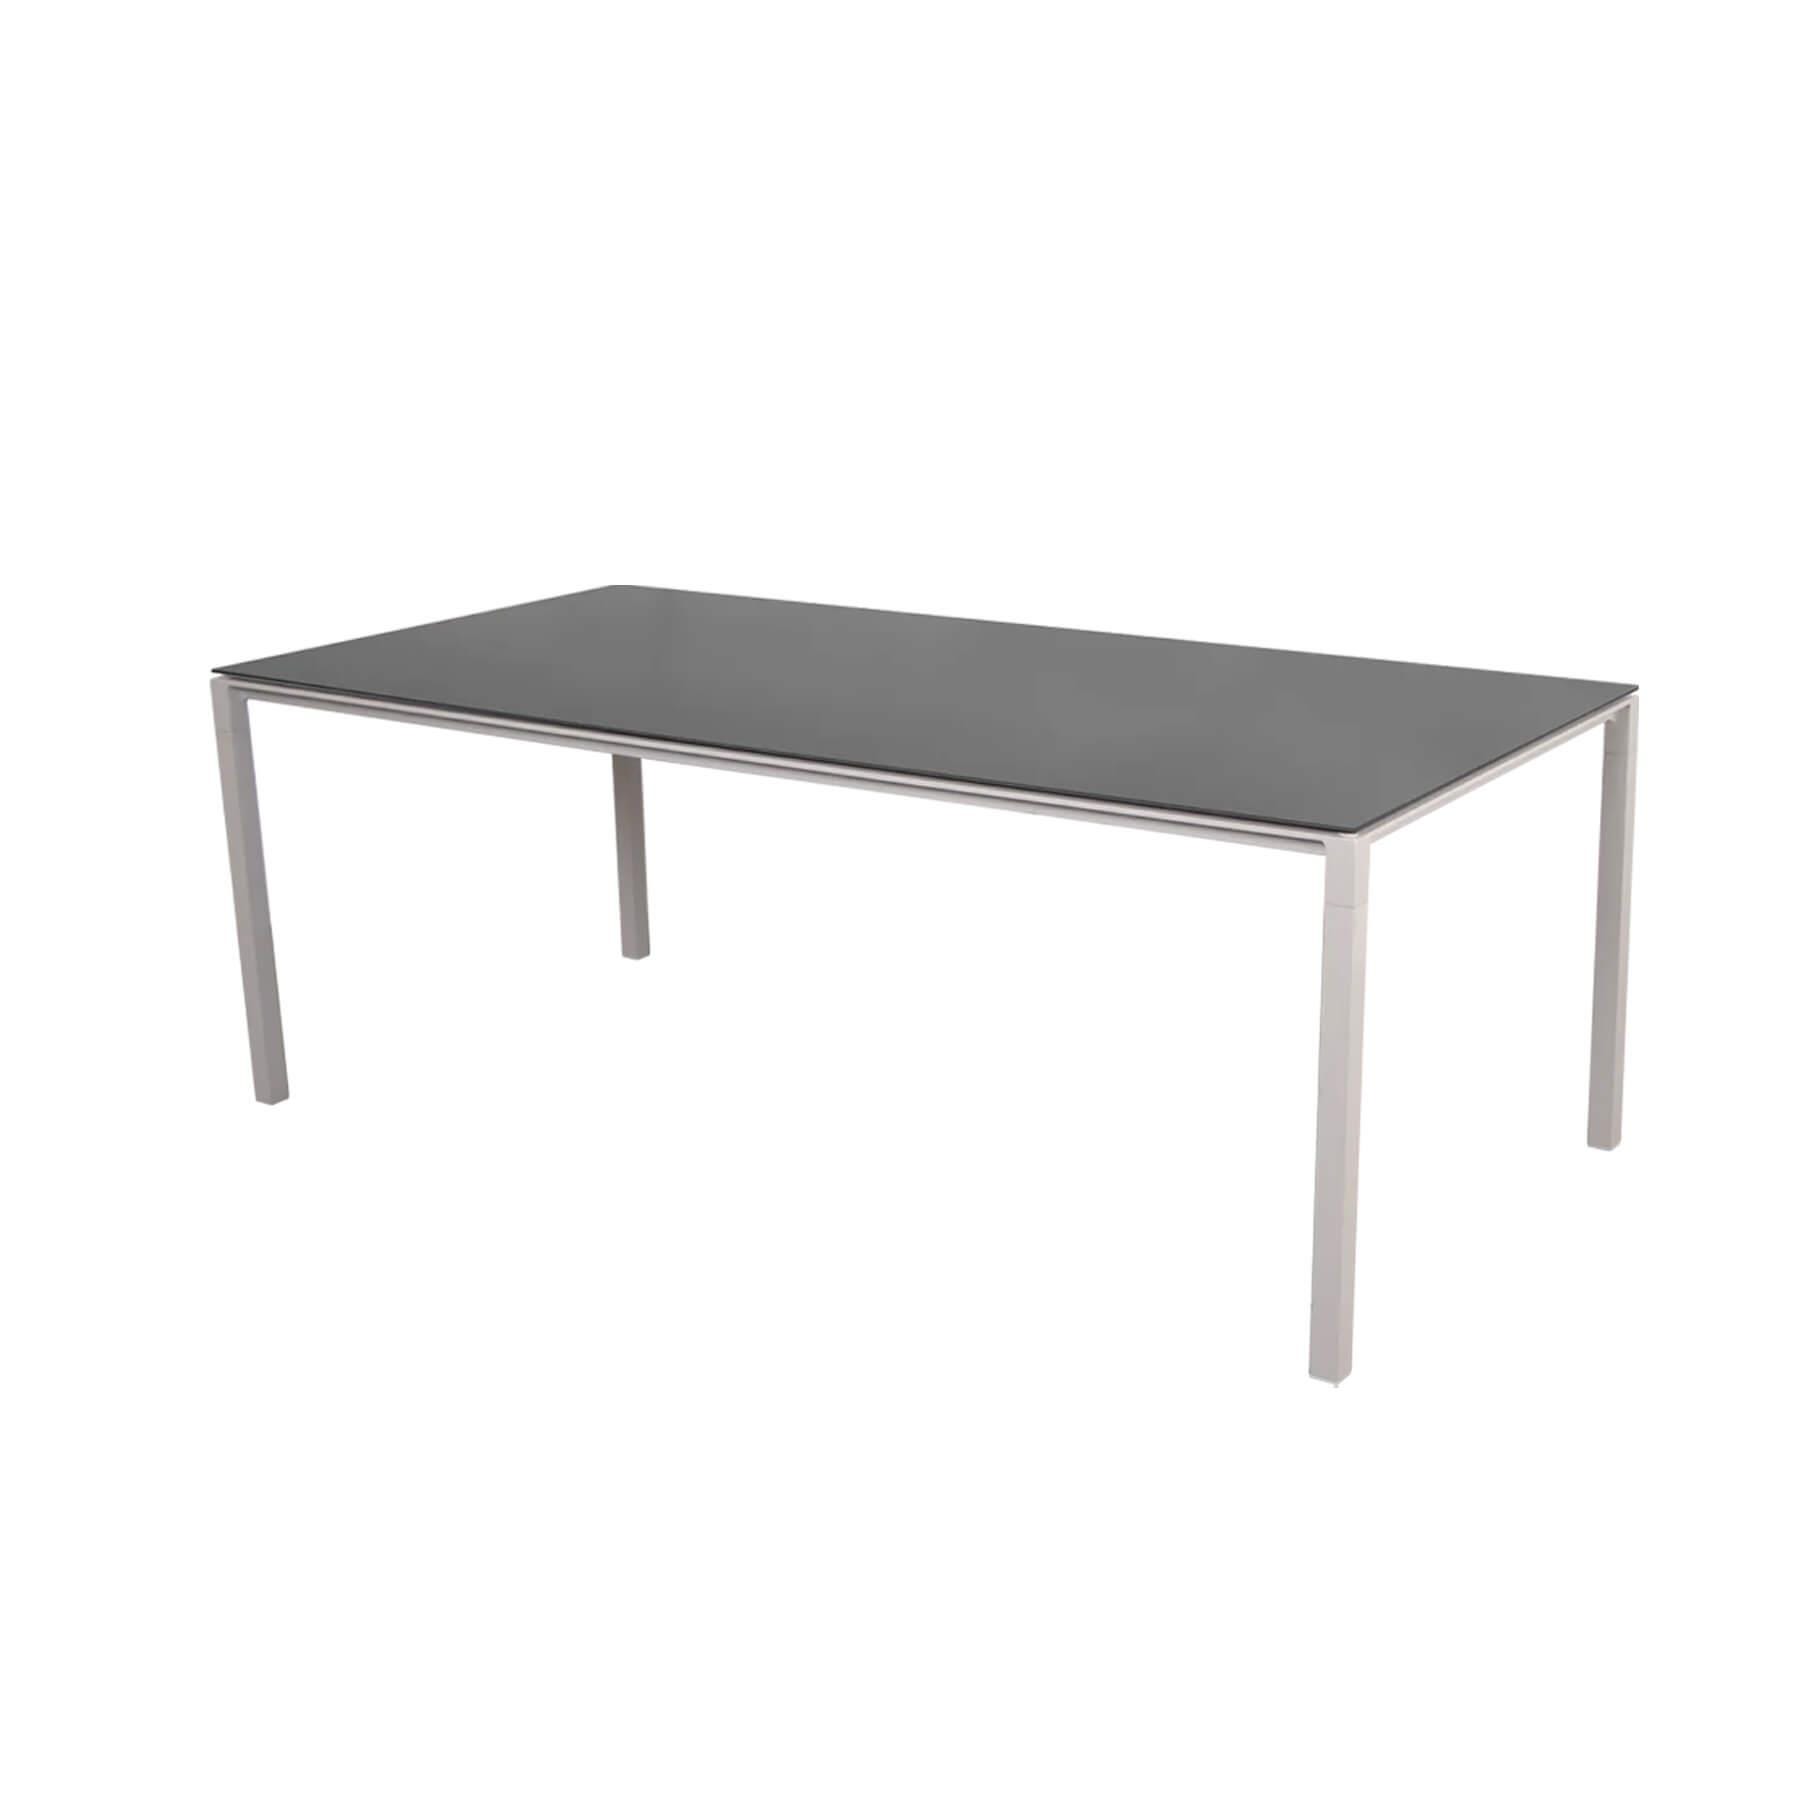 Caneline Pure Outdoor Dining Table Large Ceramic Nero Top Sand Legs Grey